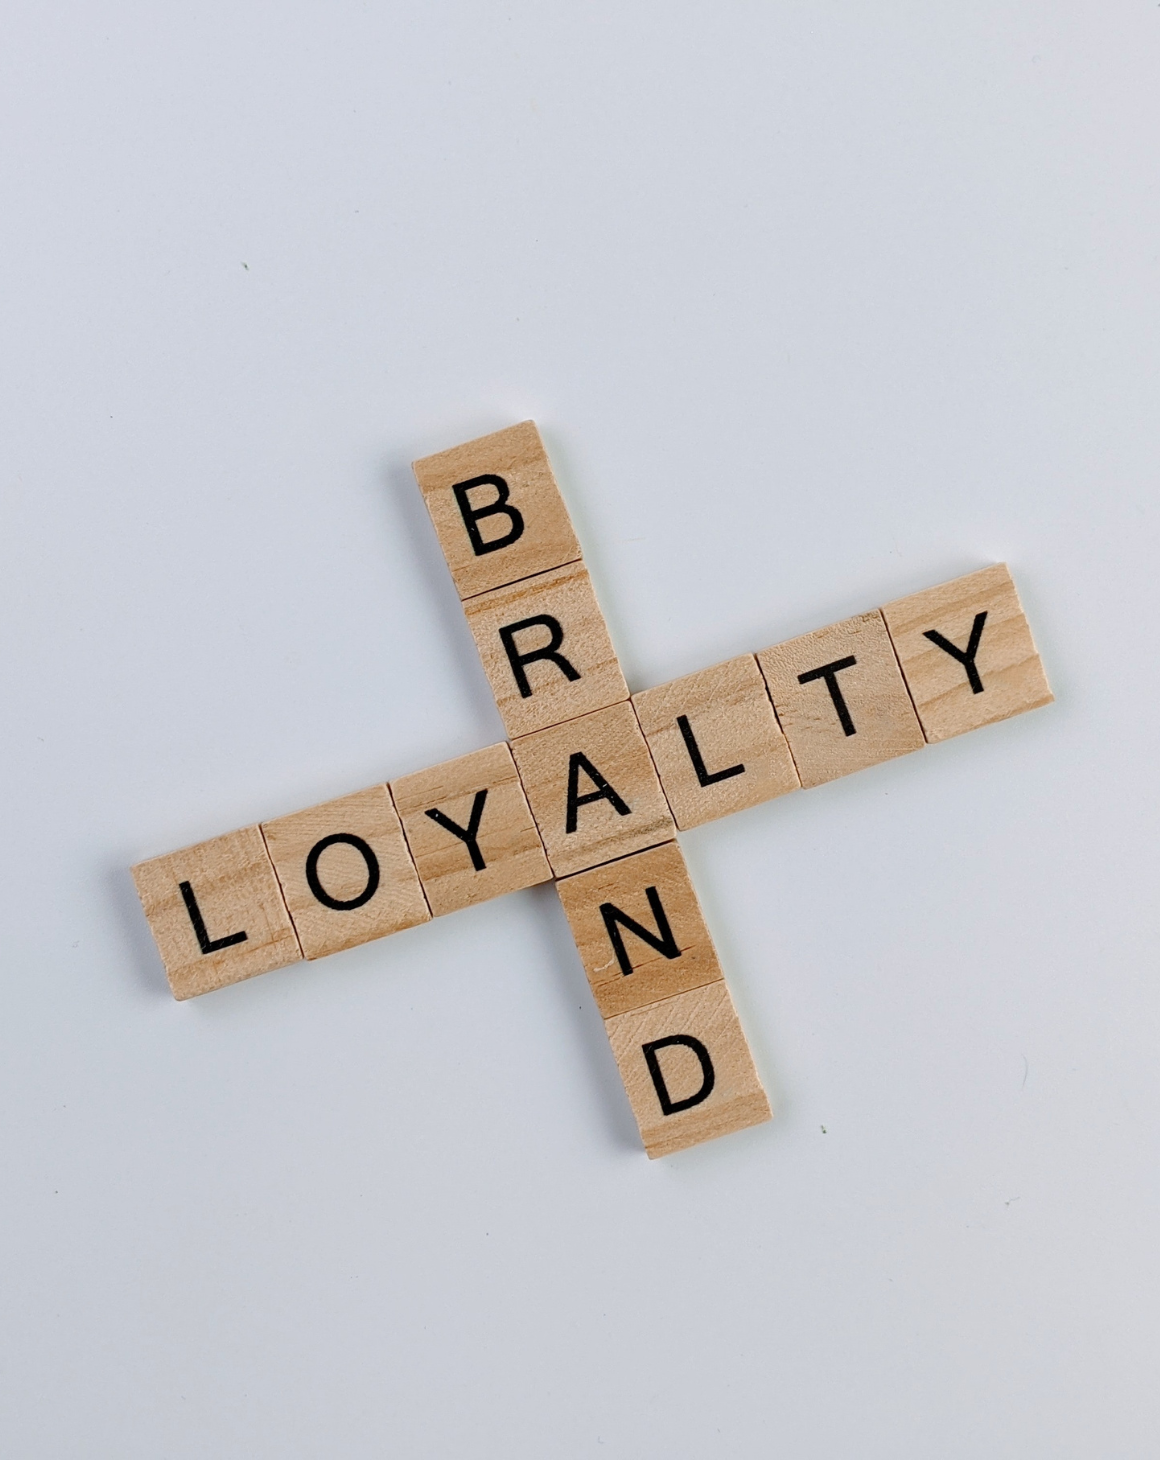 scrabble pieces spelling out "brand" and "loyalty"